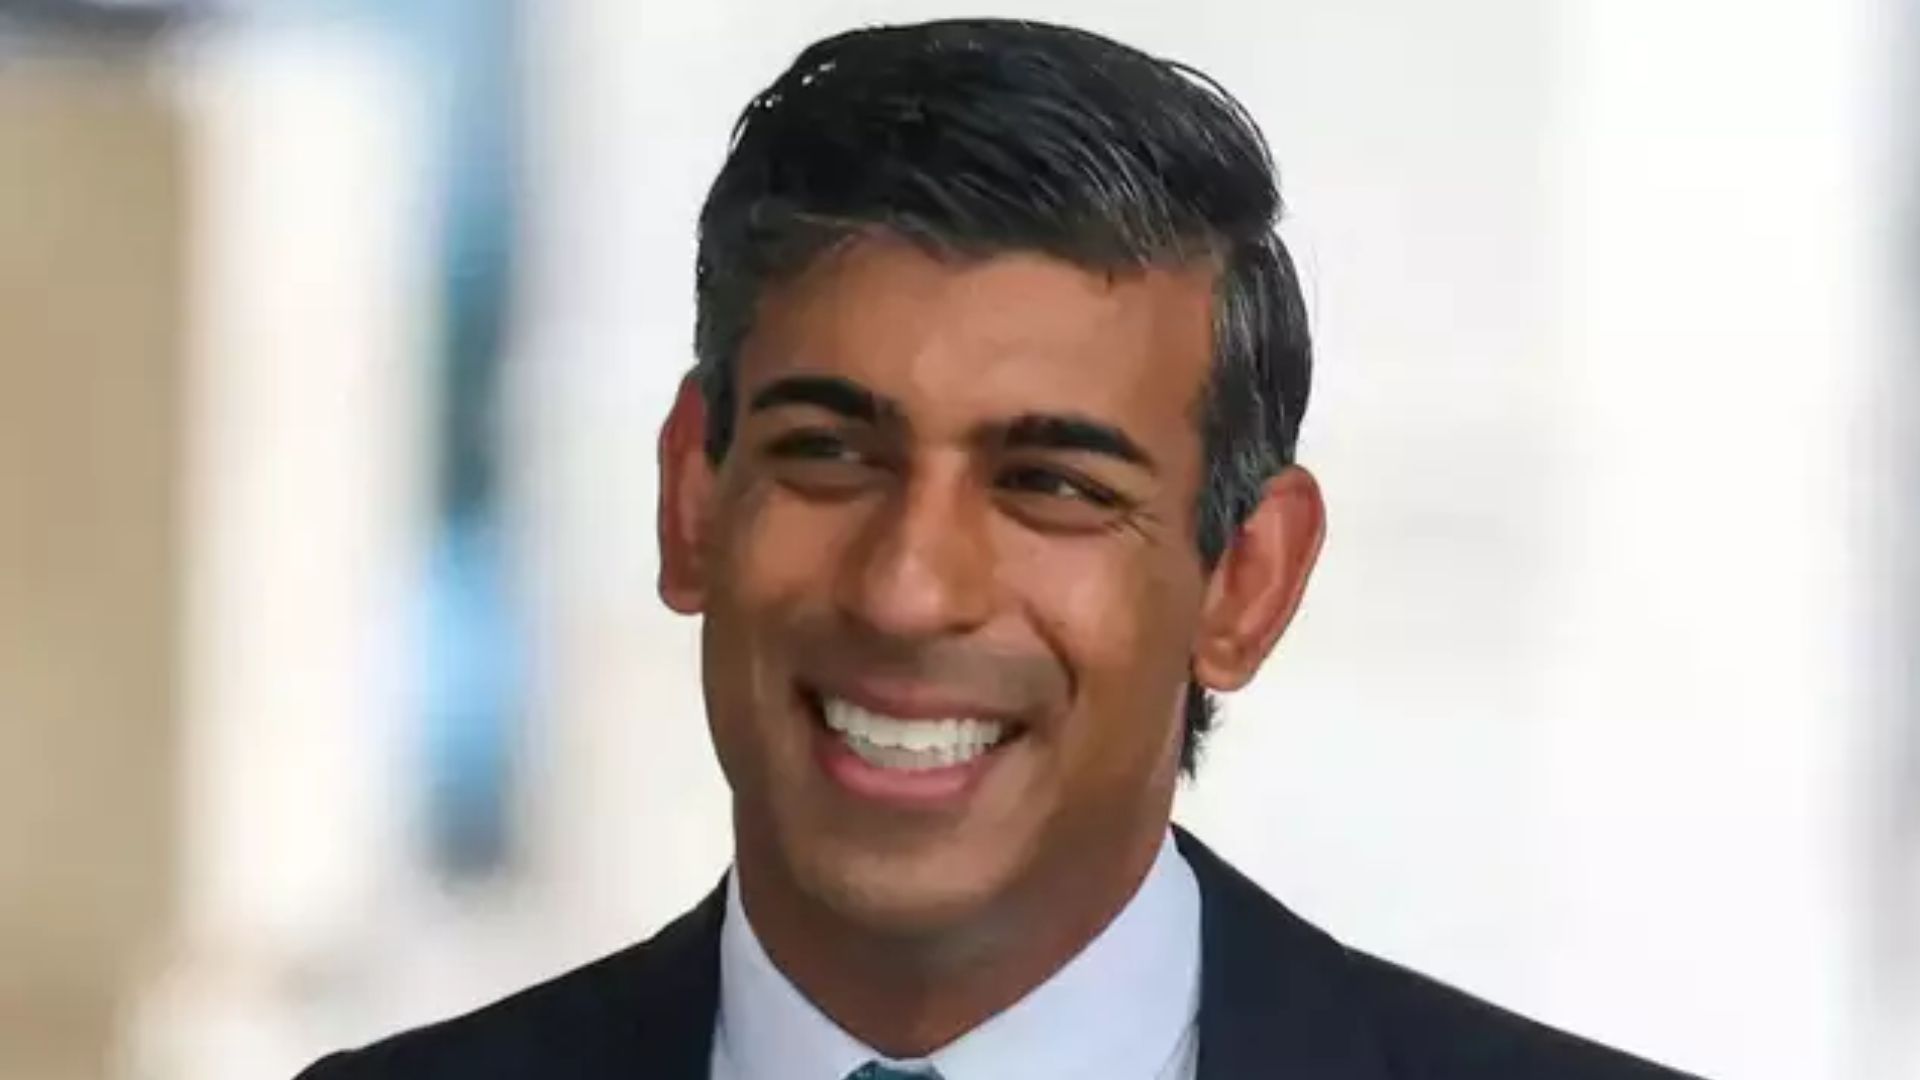 Rishi Sunak paid effective tax rate of 23% on £2.2m income last year